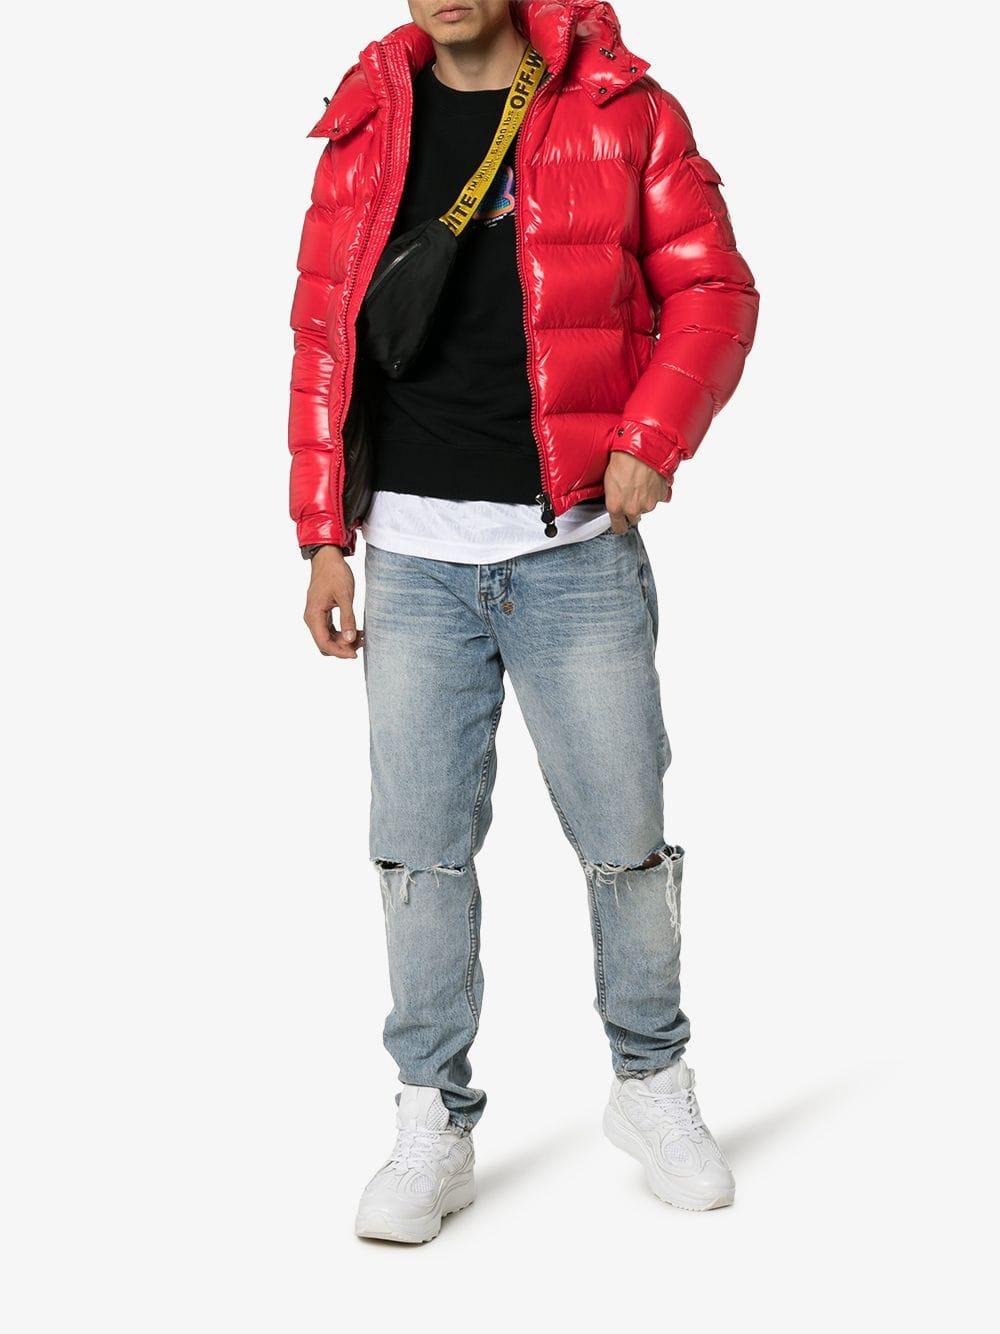 Moncler Maya Puffer Jacket in Red for Men - Lyst